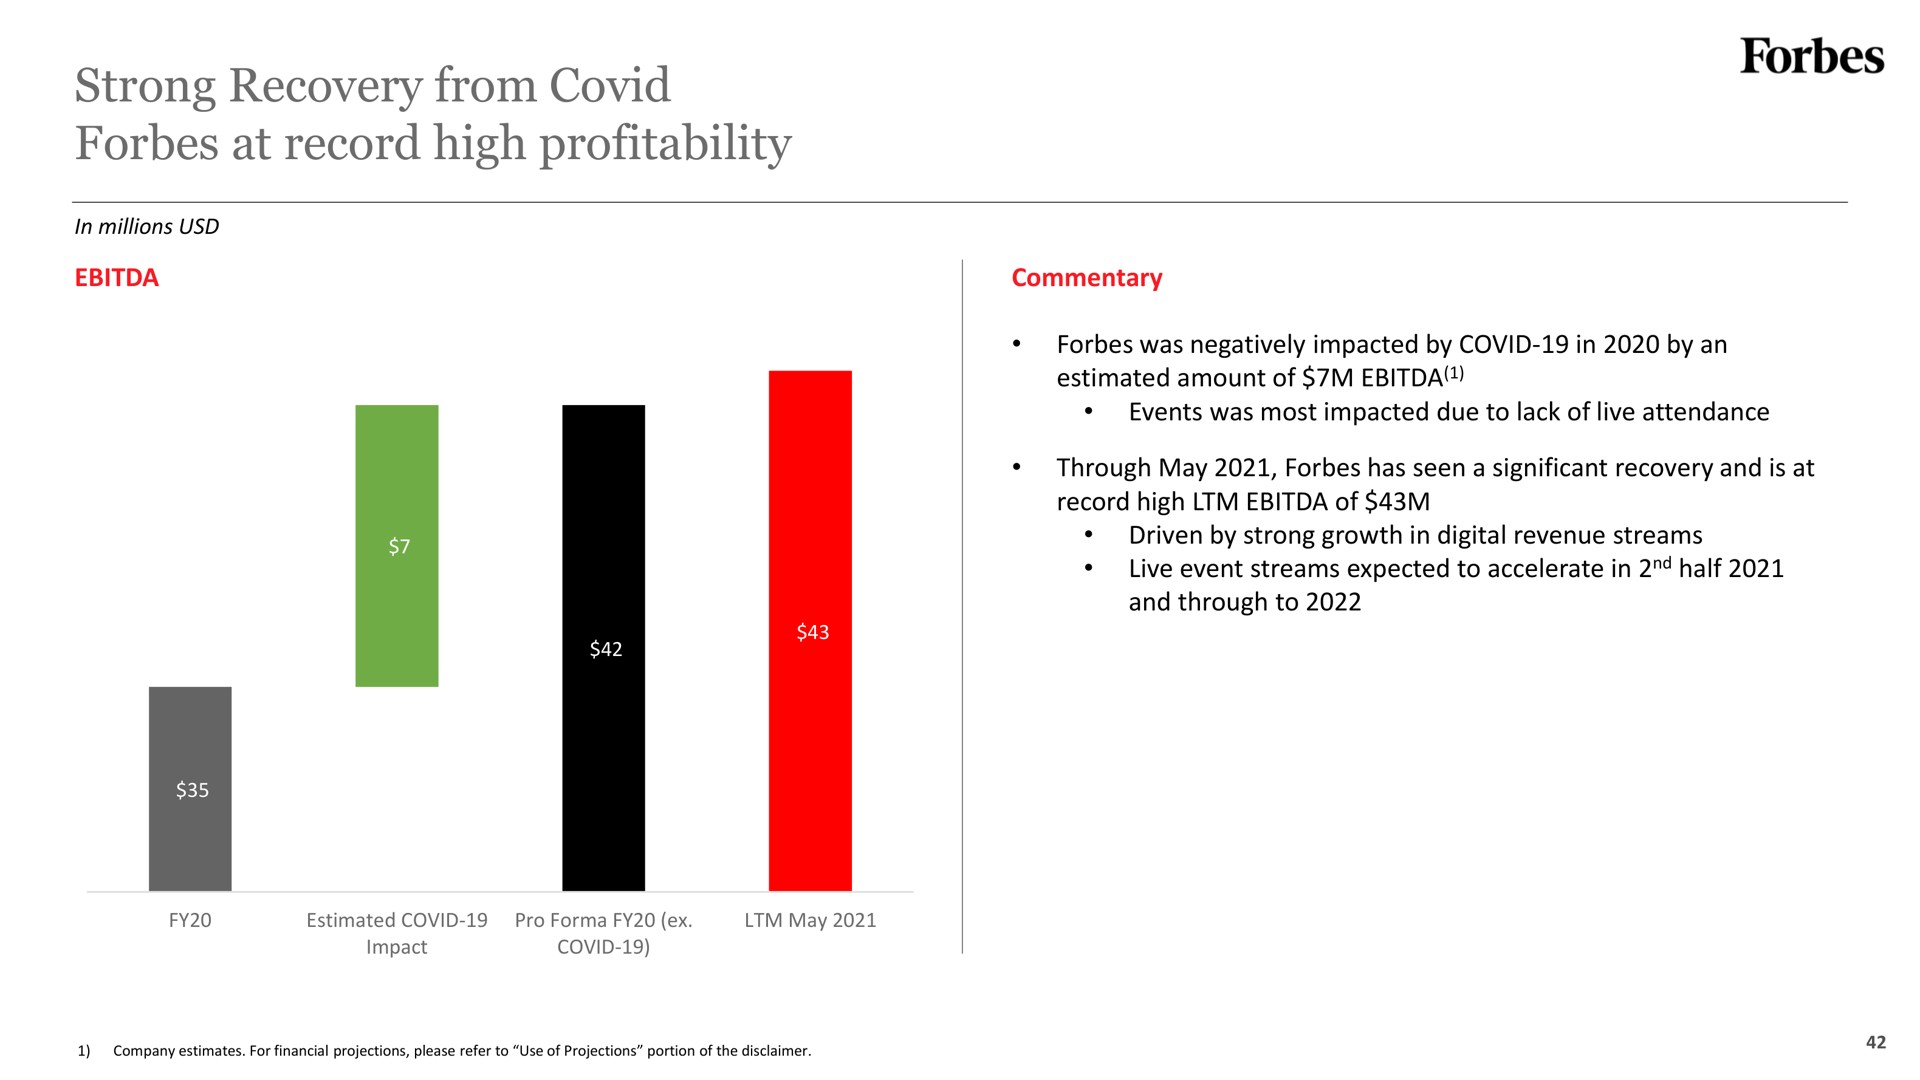 strong recovery from covid at record high profitability | Forbes